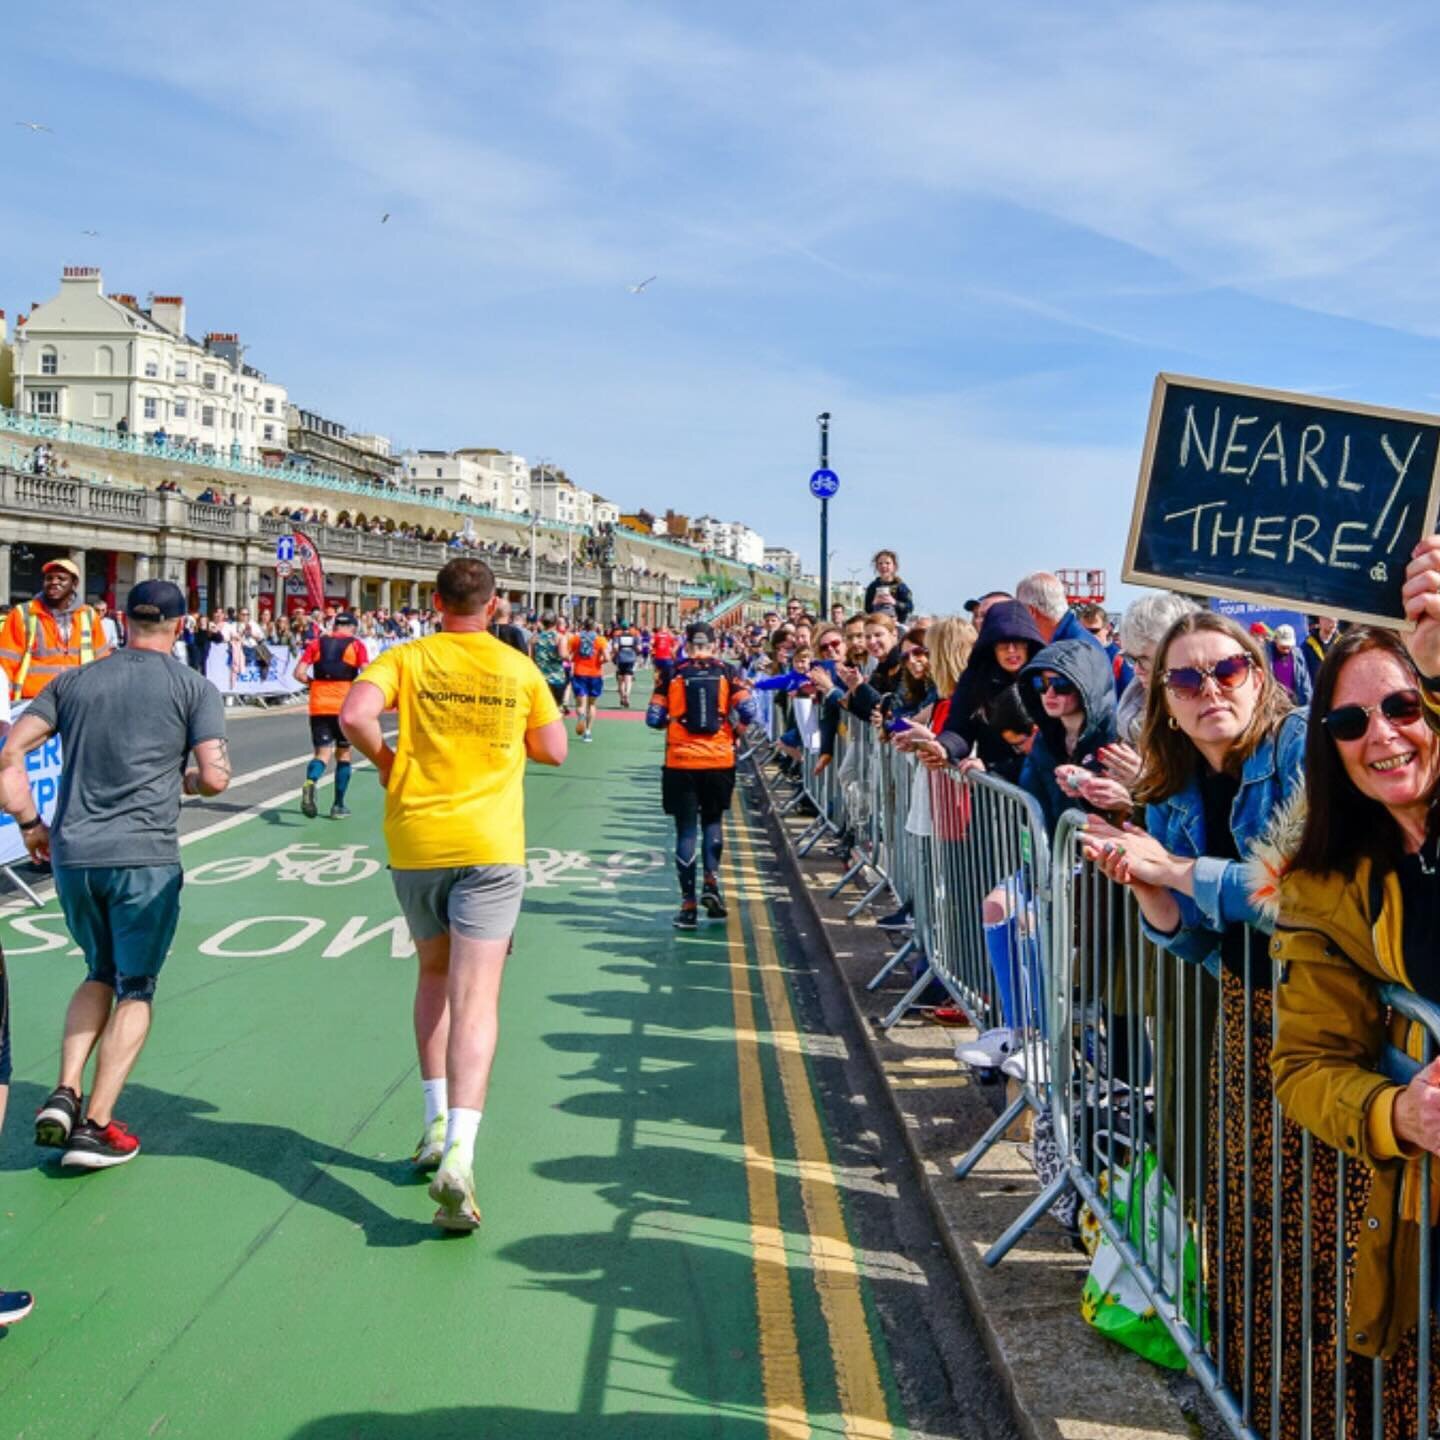 The @brightonmarathonweekend runs right past @sealanesbtn - 4 times to be precise! We are delighted to be partnering up on the event and providing some support with a DJ as an official venue. Come down and cheers to it all on Sunday. Oh, and drop us 